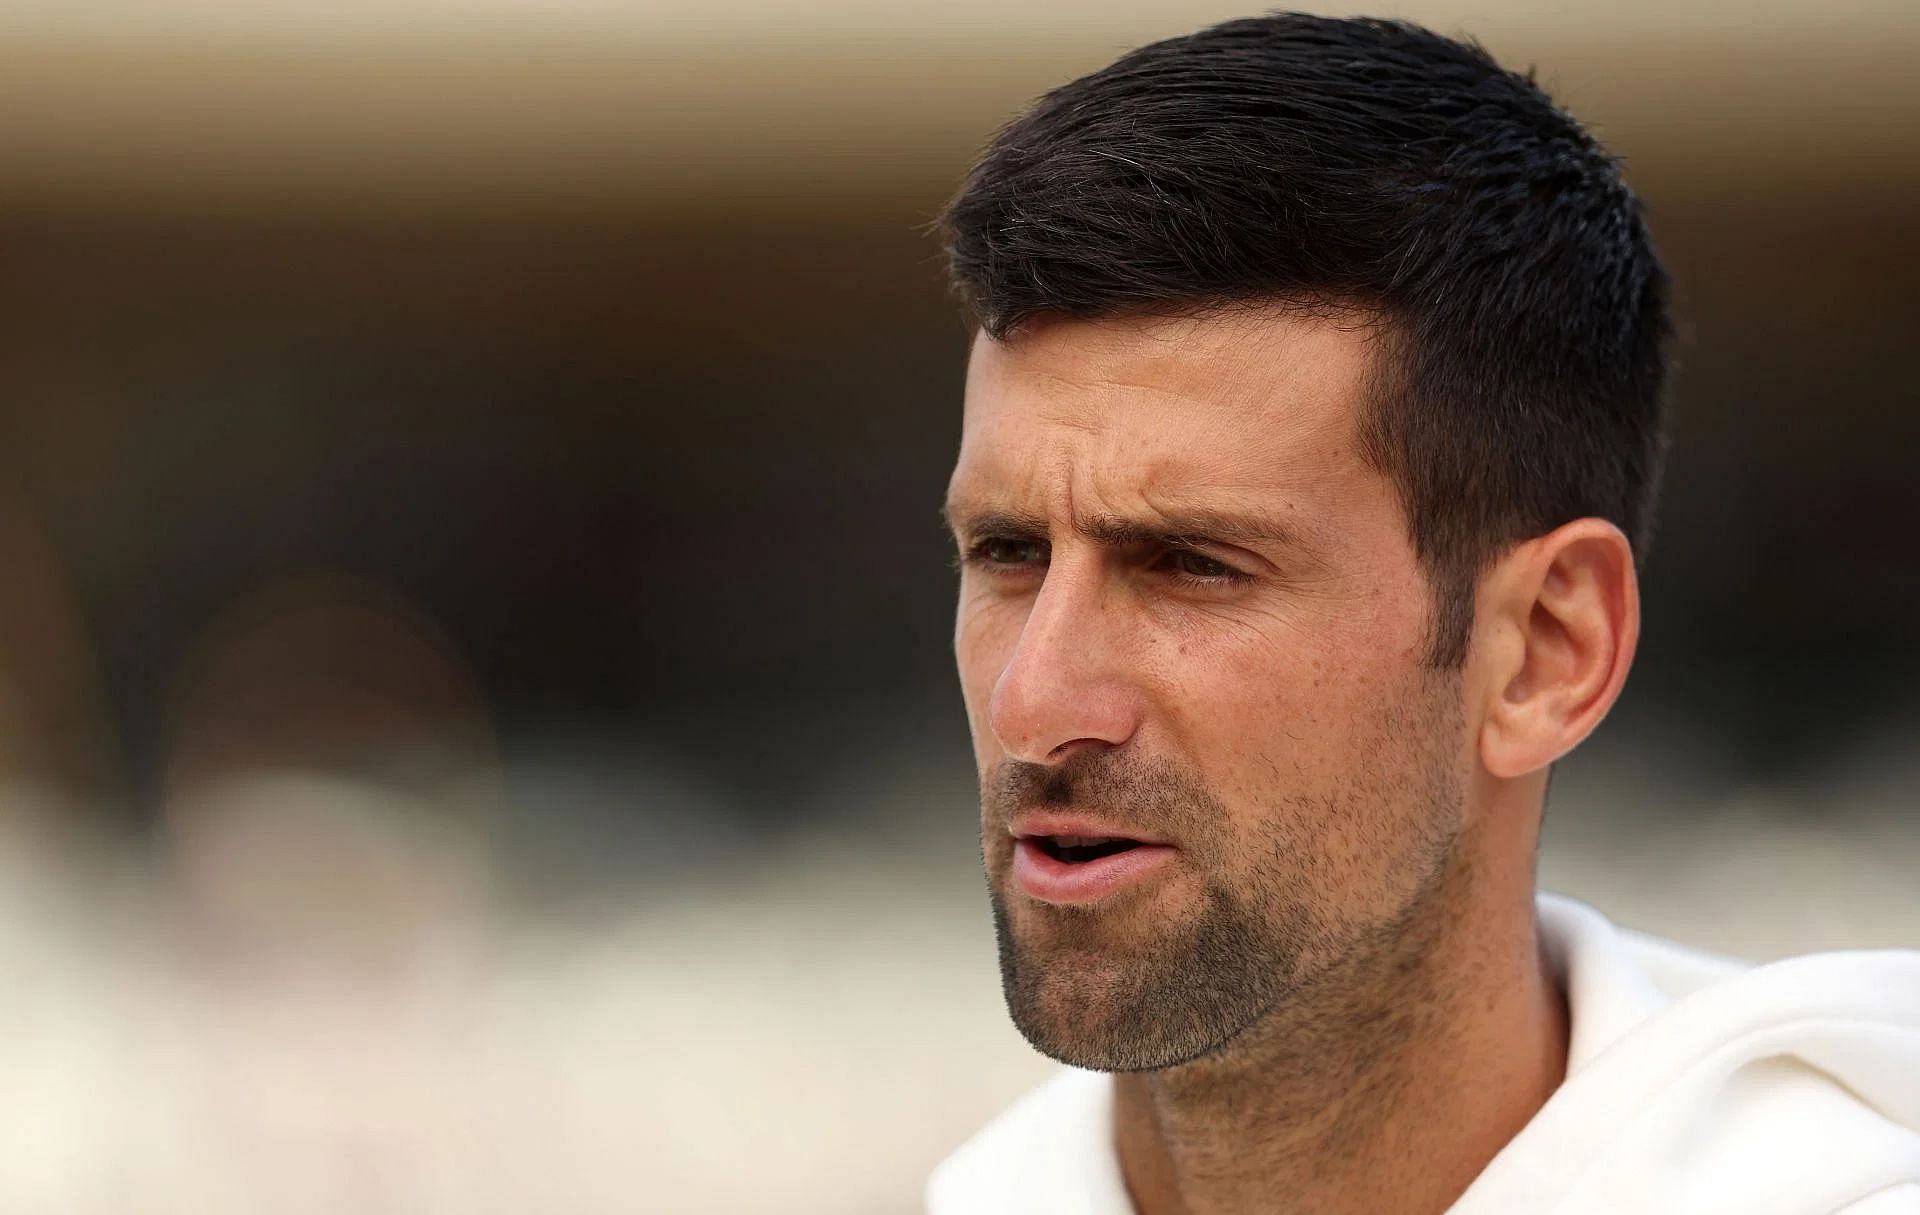 Novak Djokovic-led PTPA announces plans for 2024, seeks recognition as an independent entity representing women and men